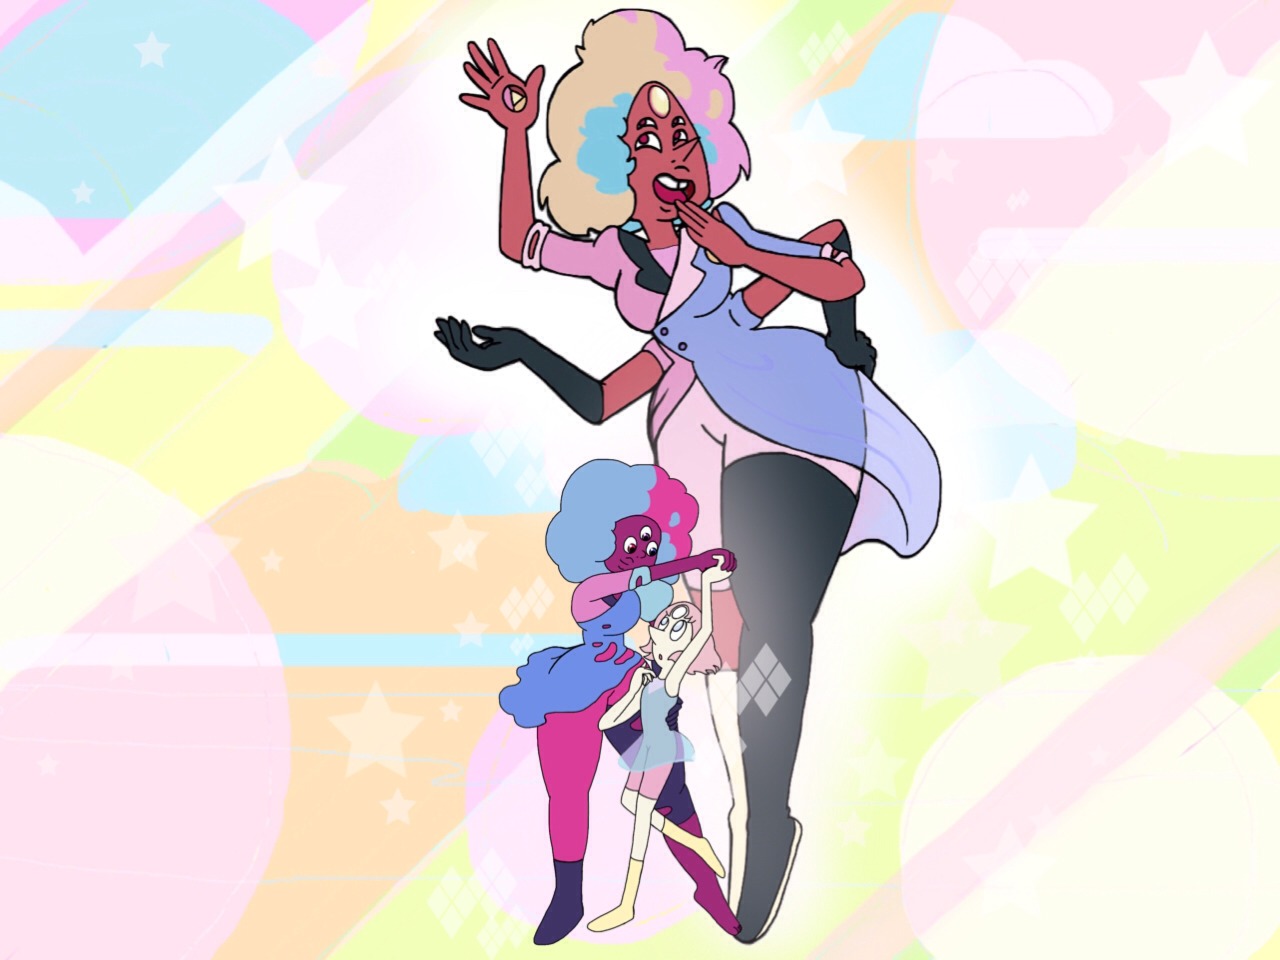 I did a thing! So immediately after watching “The Answer” I came up with this idea. I wondered what Sardonyx would have looked like based on ‘Cotton Candy Garnet’ and ‘Renegade Pearl.’ I call her:...